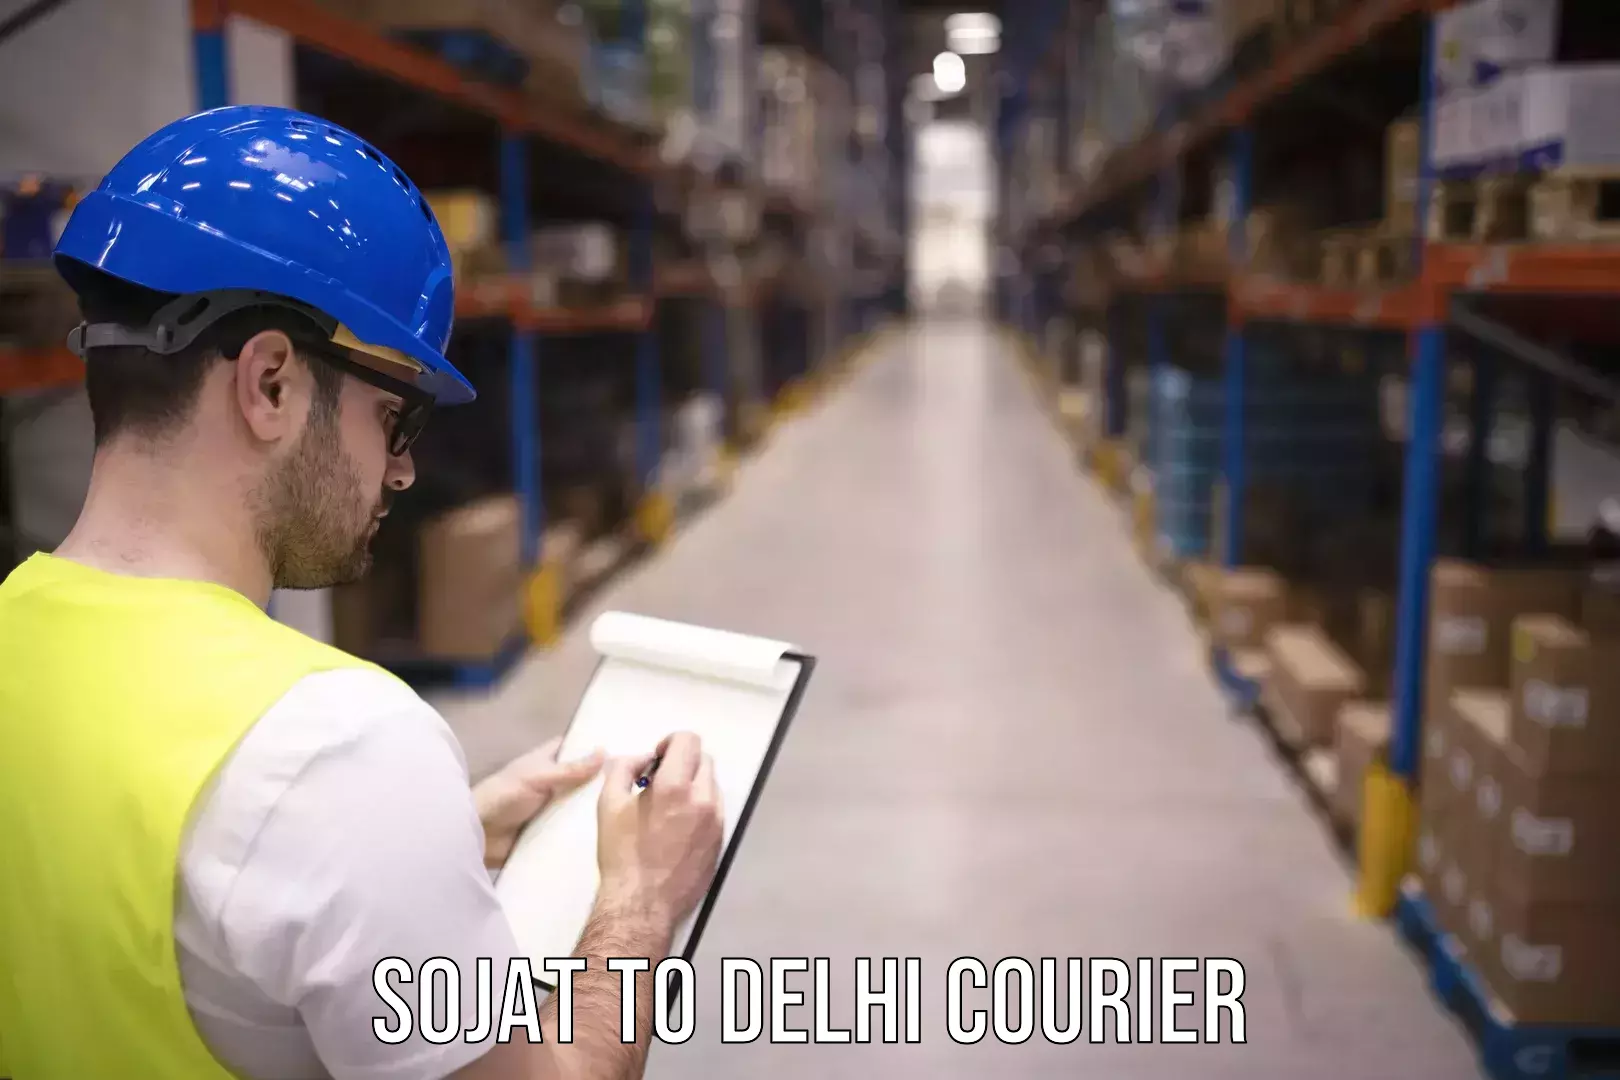 Bulk courier orders Sojat to NCR